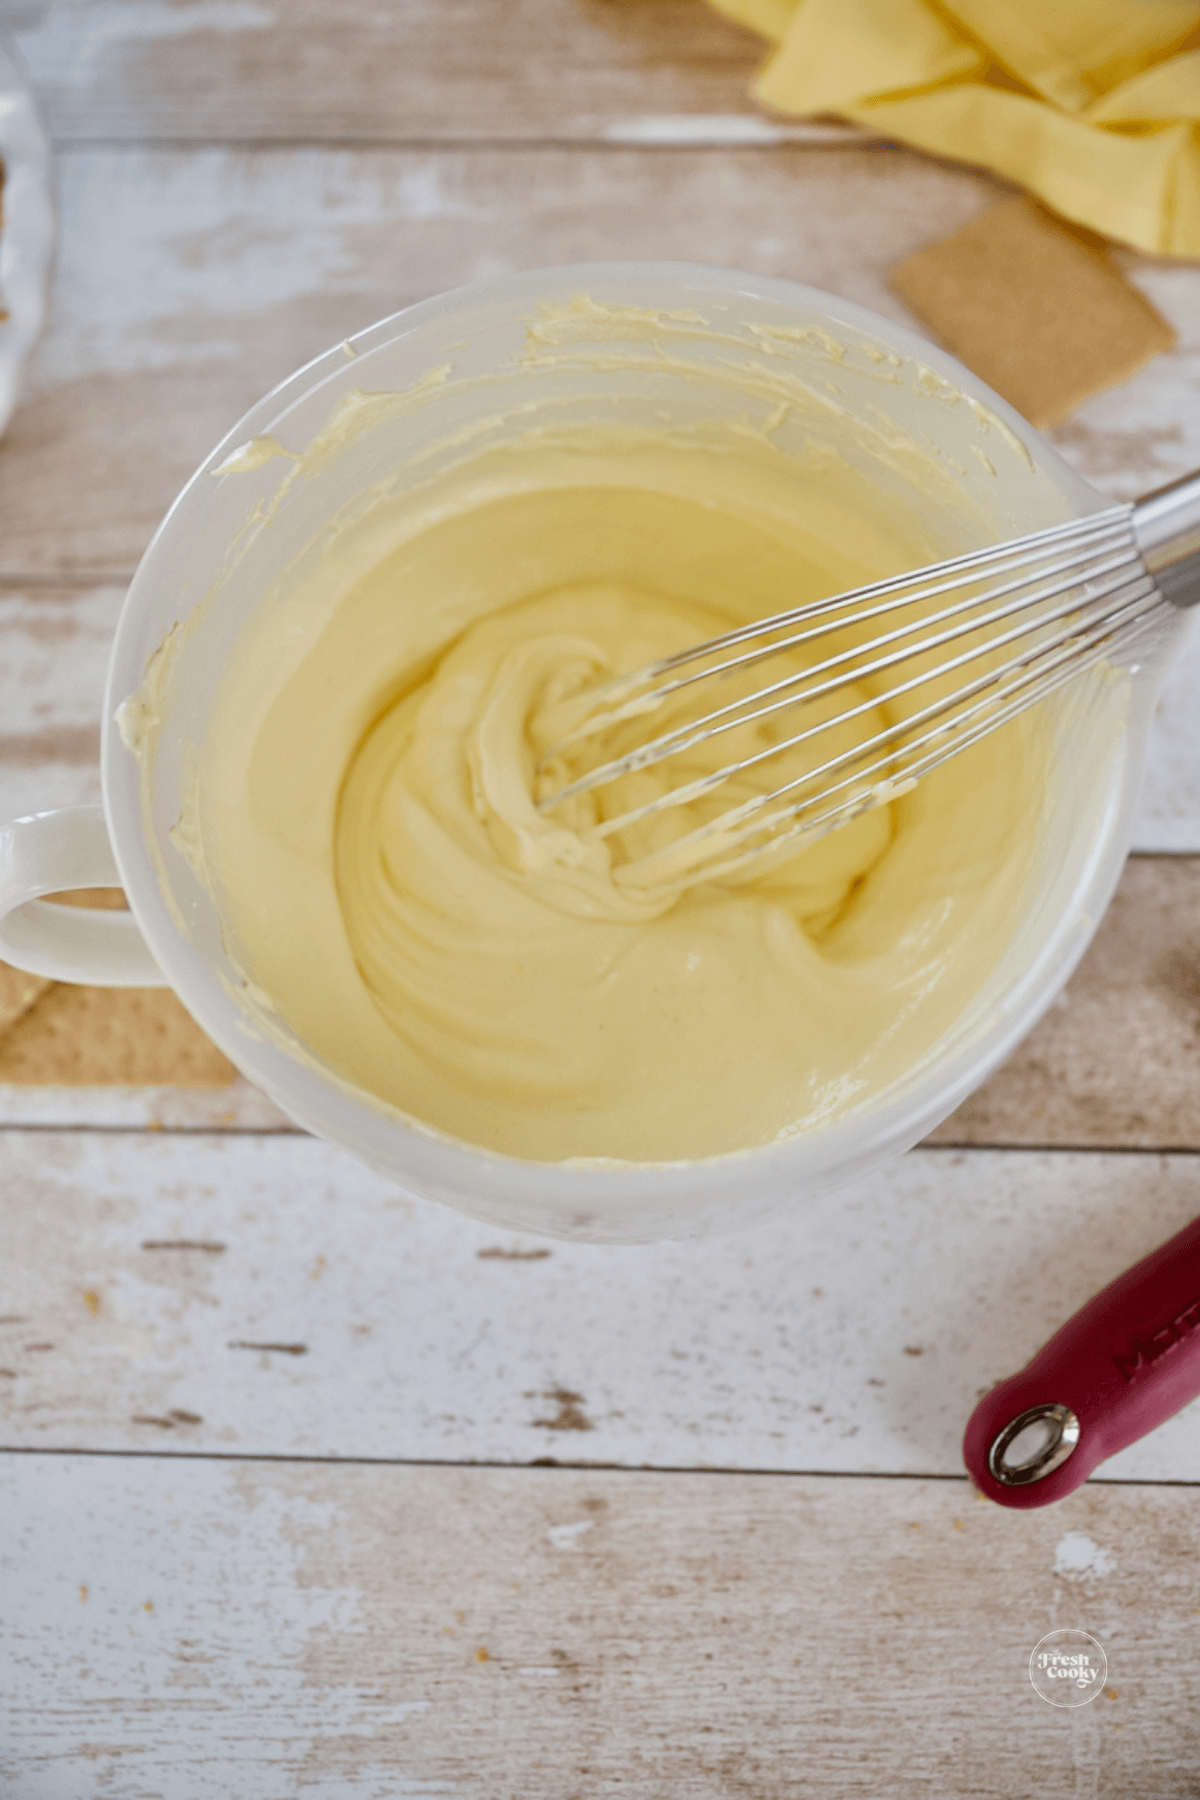 Quickly whisk to completely combine, don't over do it.